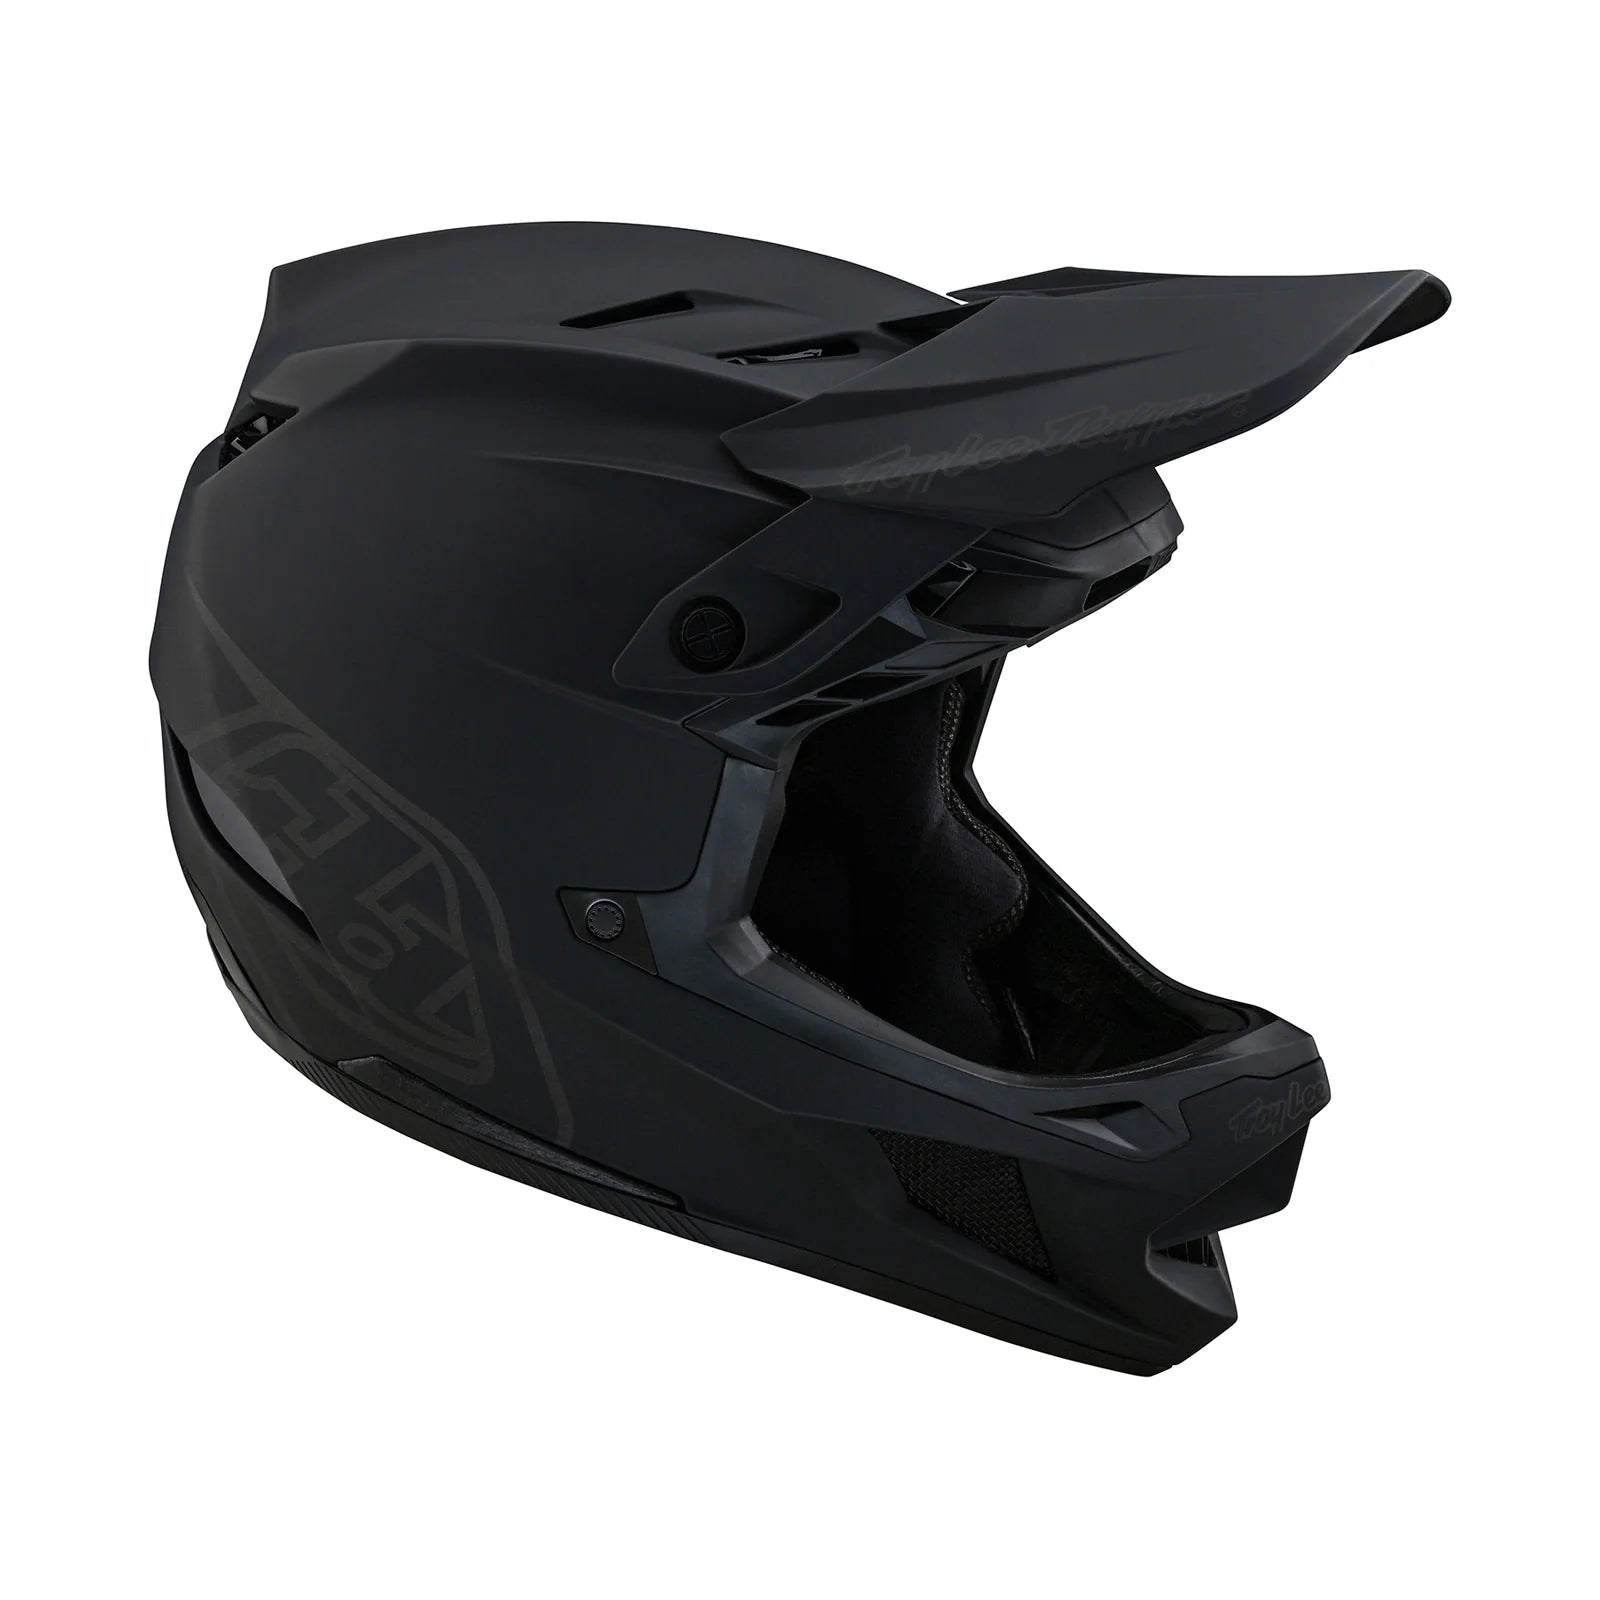 A TLD D4 AS Composite helmet on a white background.